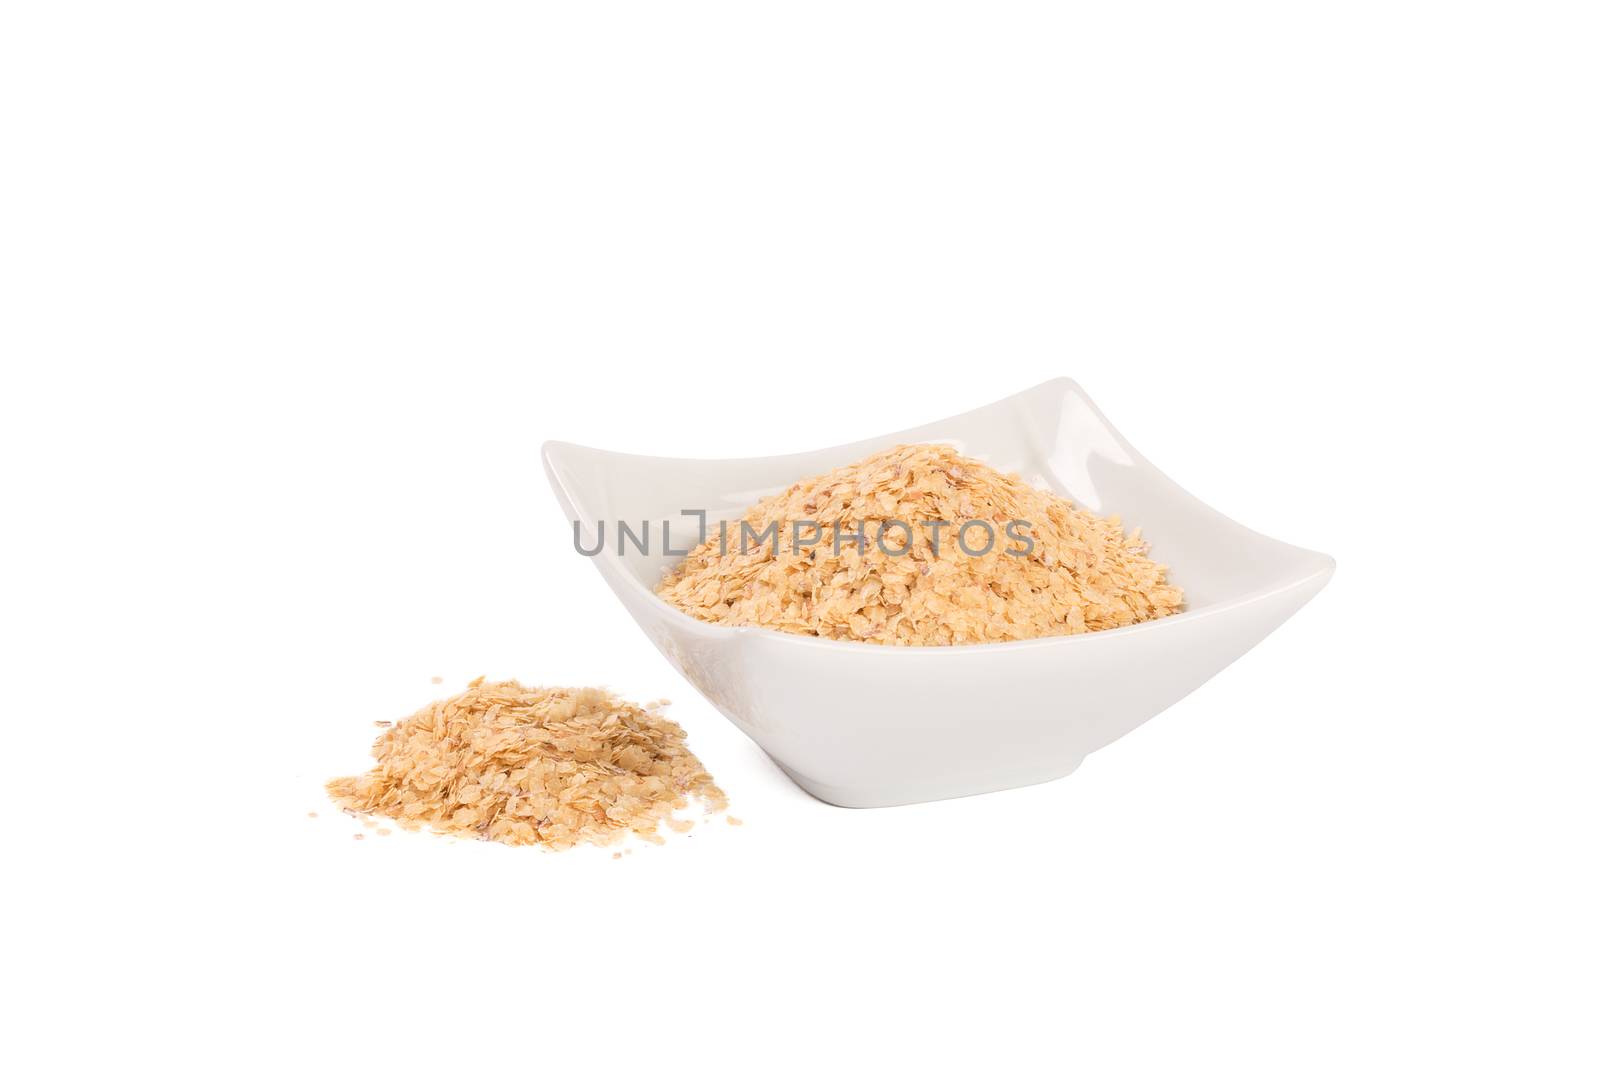 Wheat germ, the highly nutritious heart of the wheat kernel. isolated